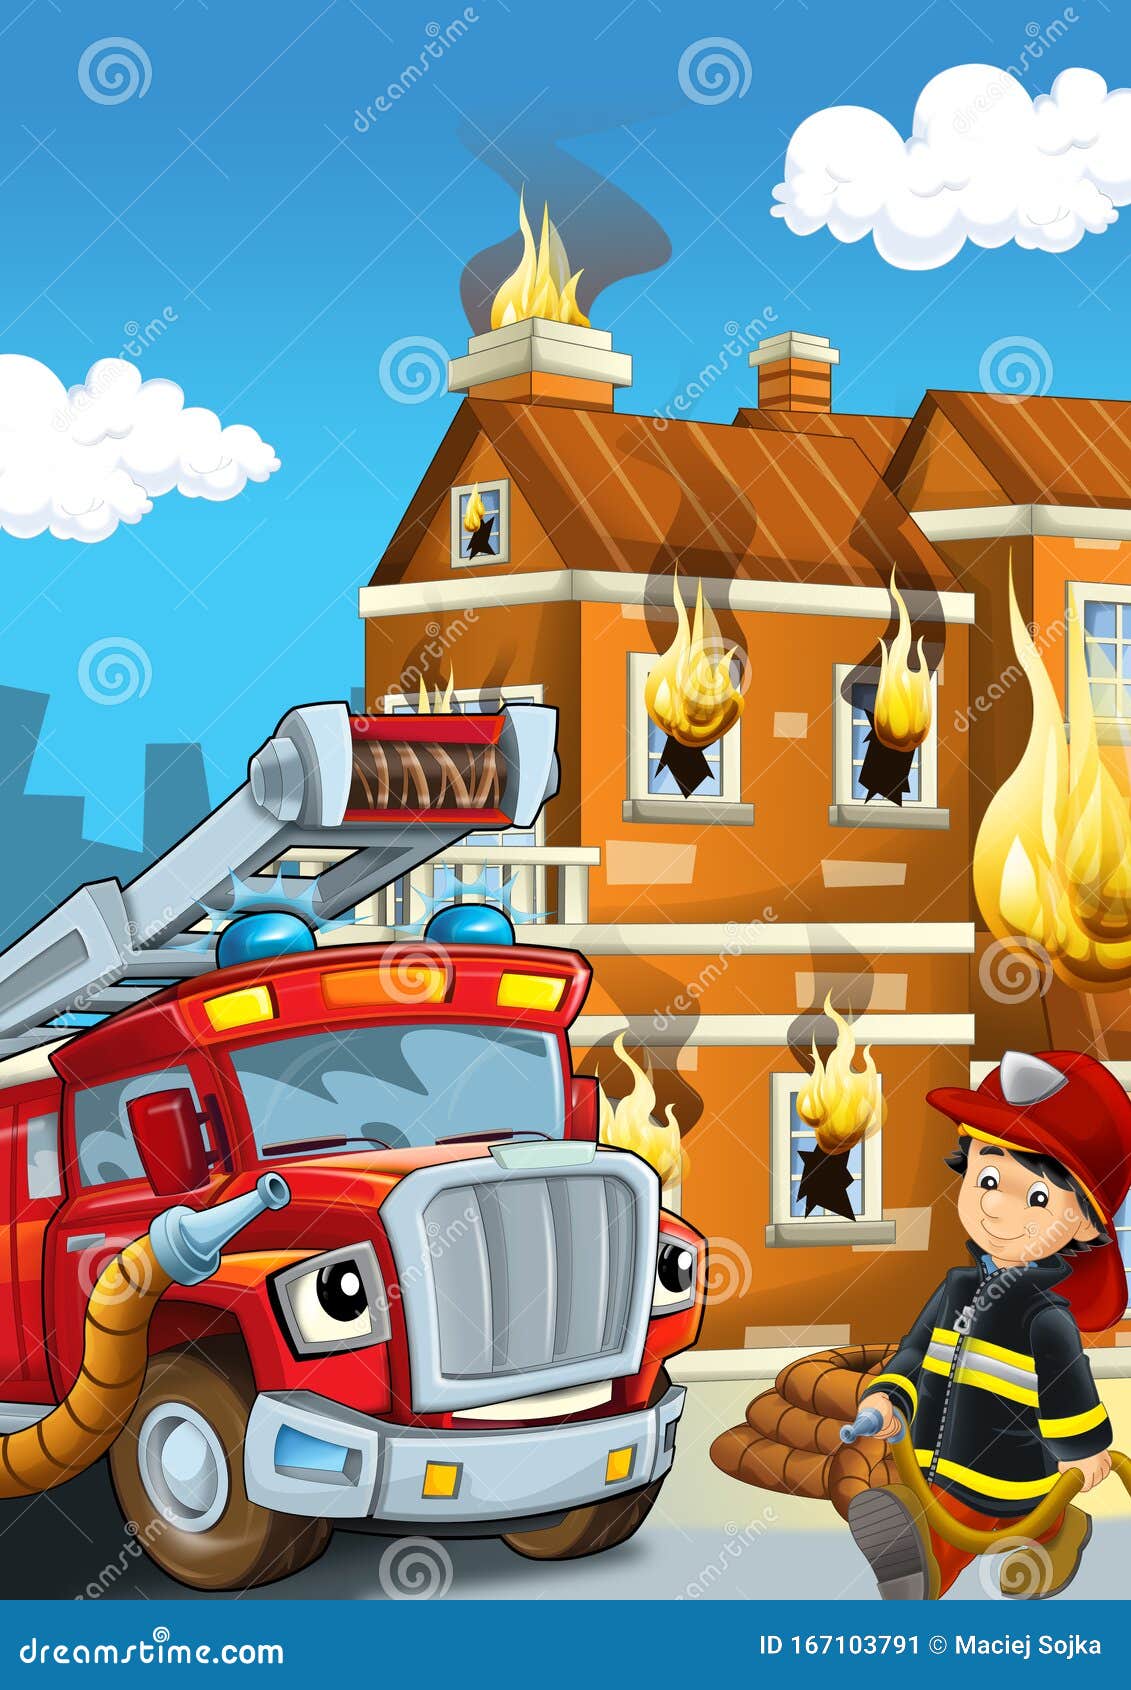 Cartoon Scene with Fire Fighter Machine Fireman Vehicle and Fireman Boy Putting  Out the Fire Burning Building Illustration Stock Illustration -  Illustration of beauty, duty: 167103791